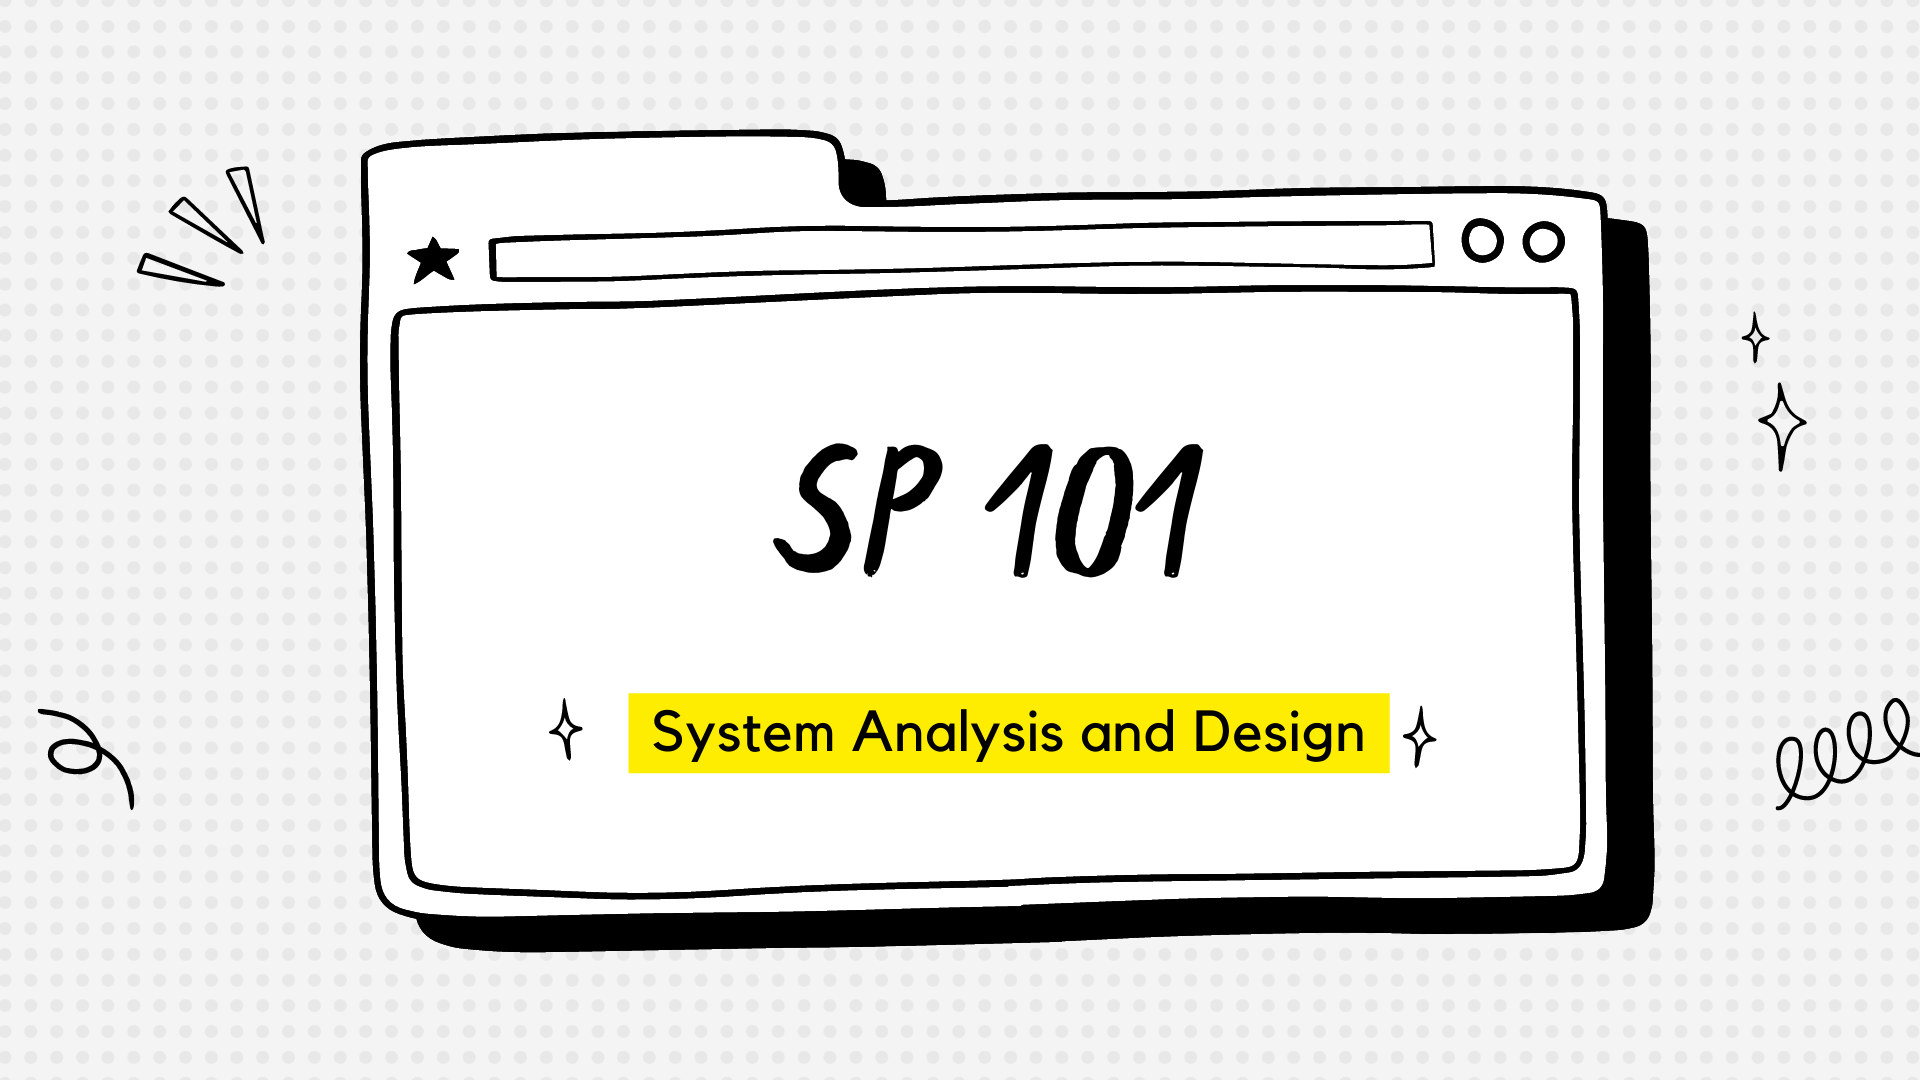 Special Topics 1 (System Analysis and Design)